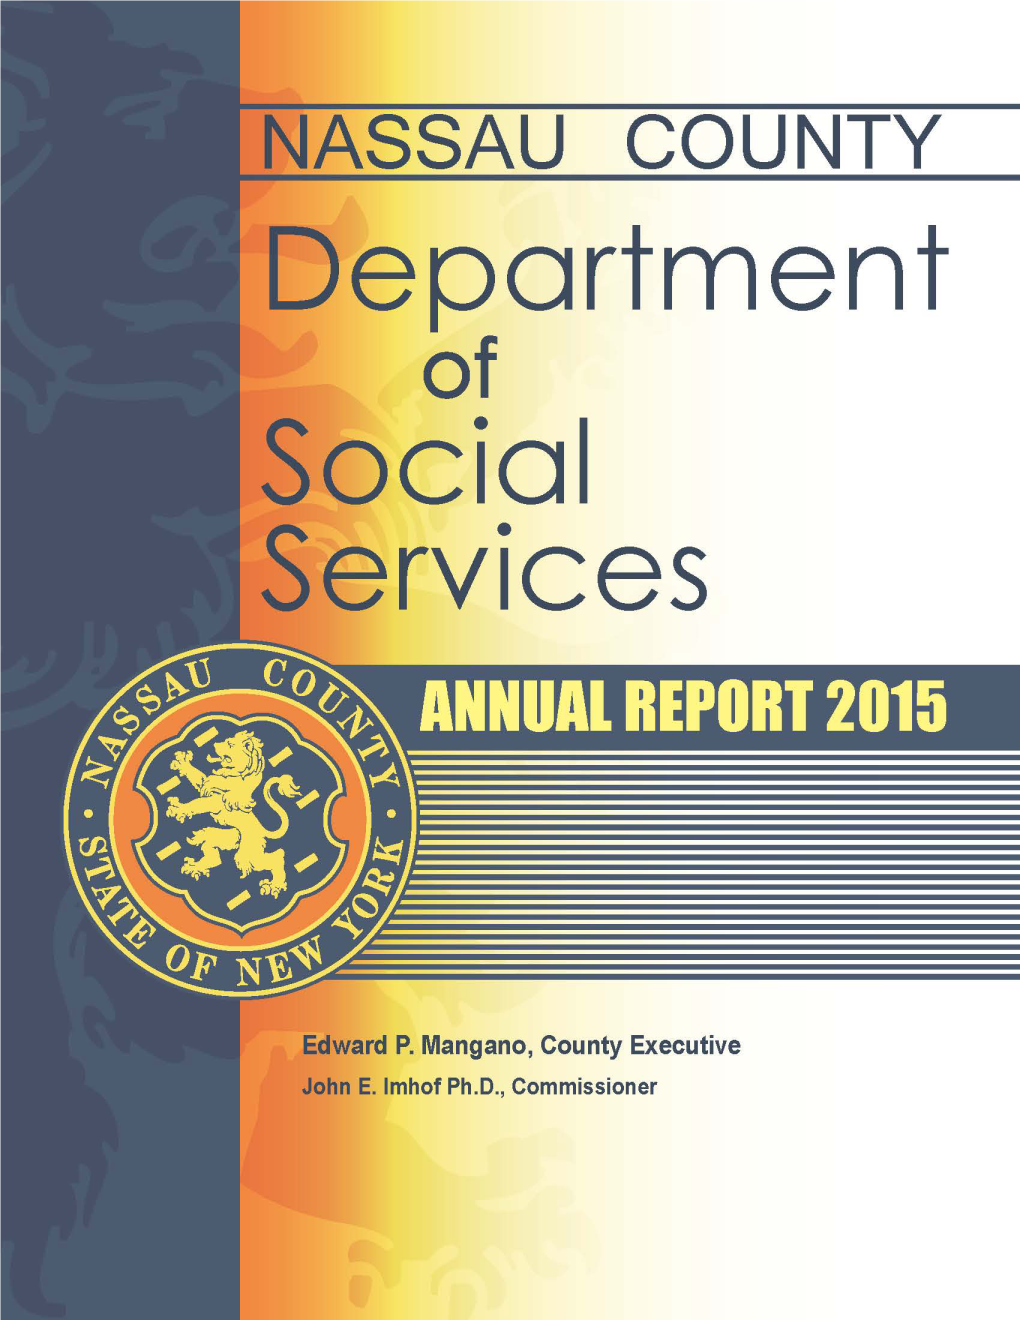 DSS Continues to Demonstrate Itself As One of the Most Innovative and Progressive Social Services Howard J